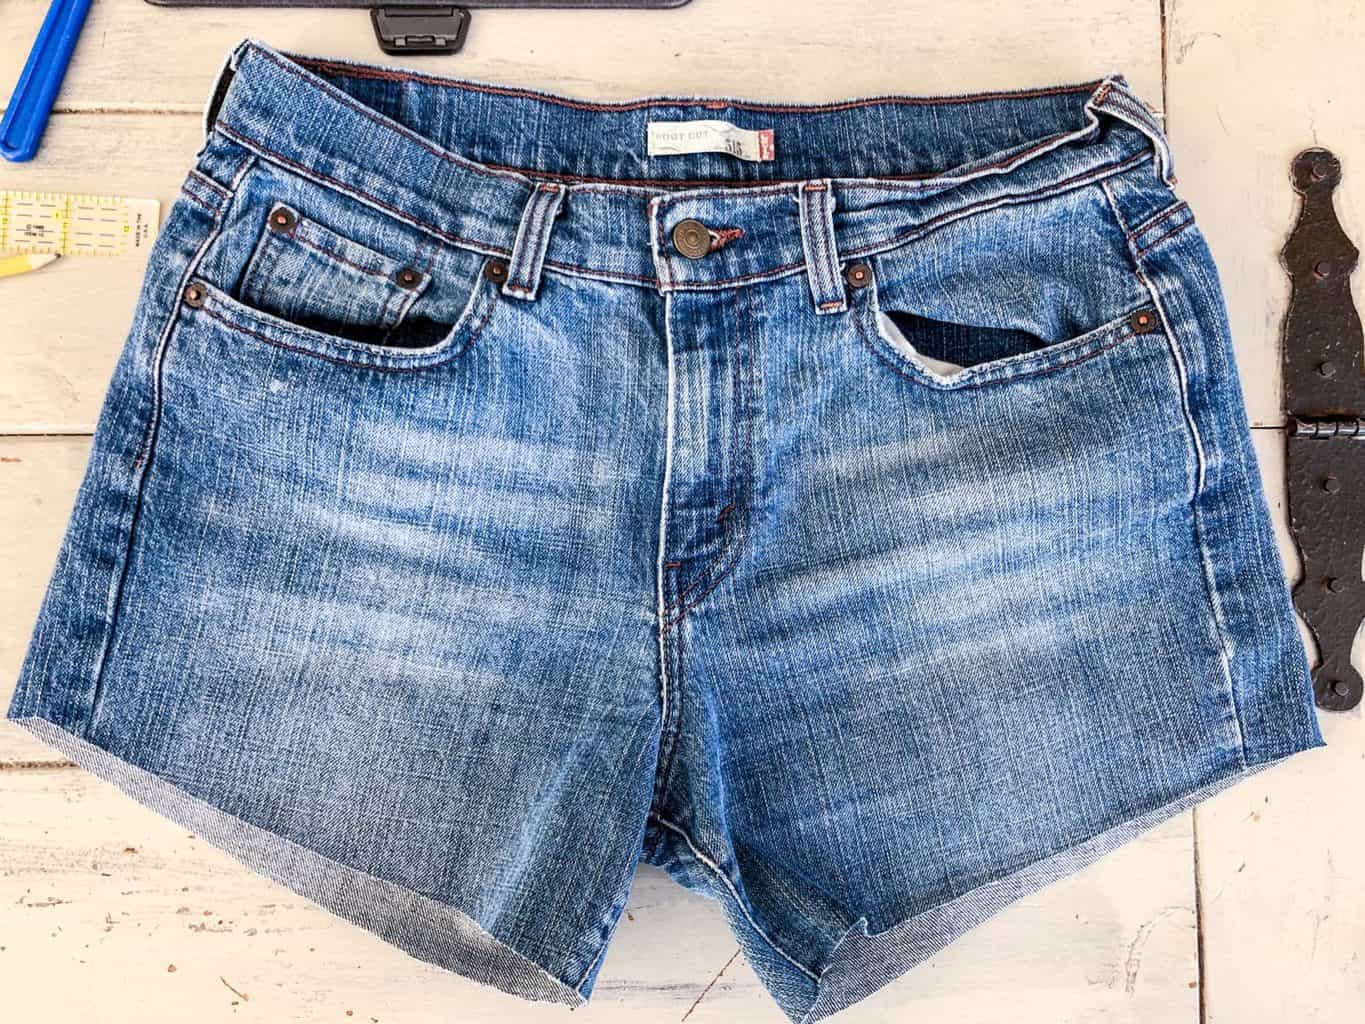 DIY Denim Shorts | Thrifted Jeans Into Shorts - Thrifted & Taylor'd